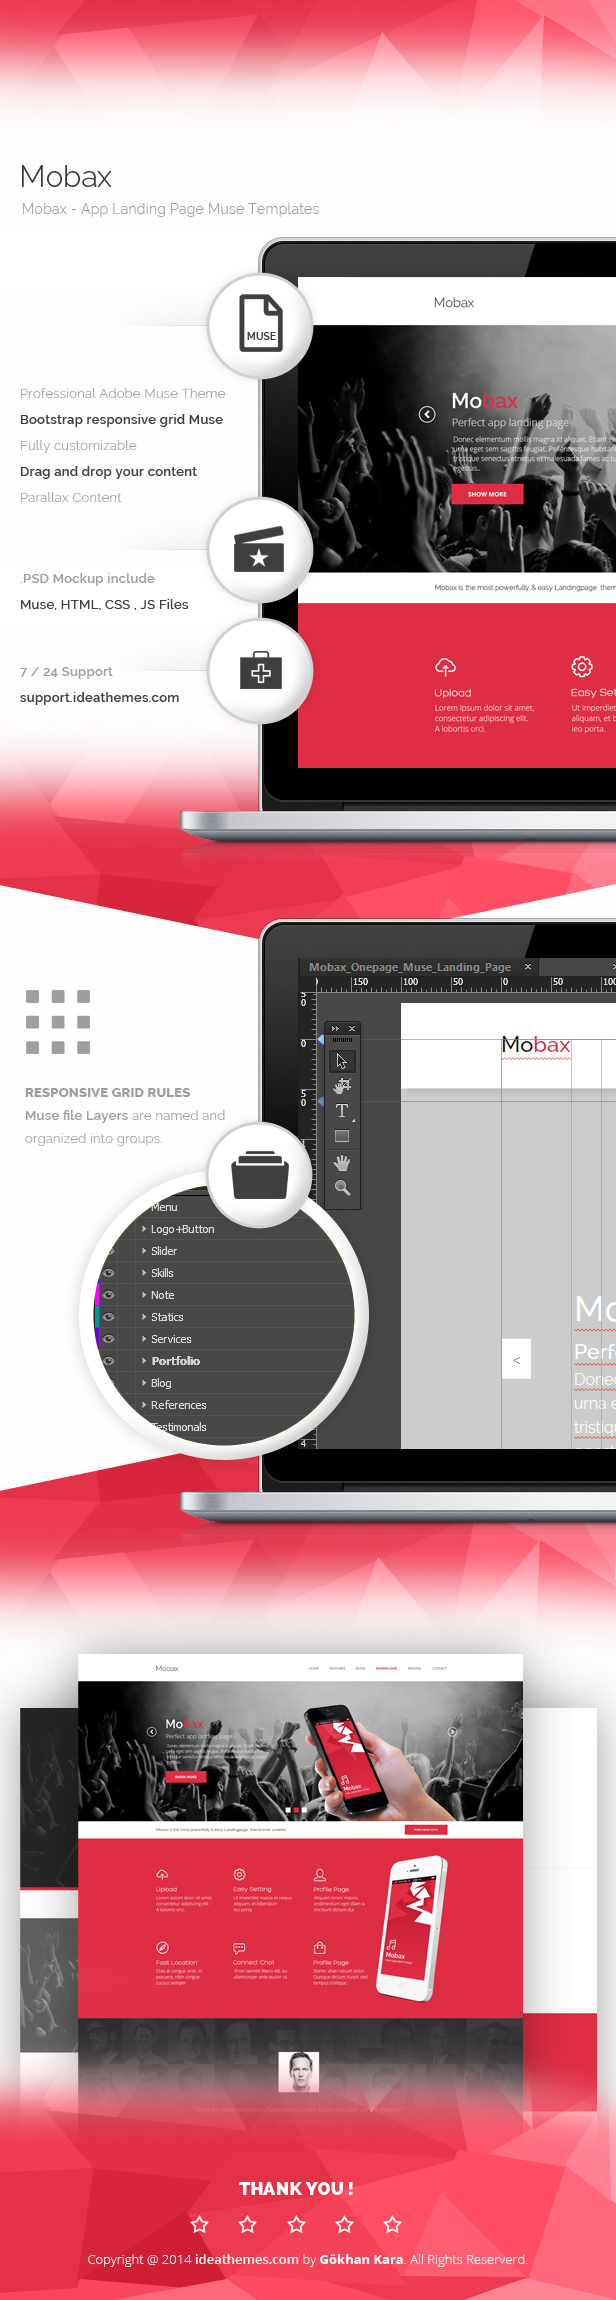 Mobax - App Landing Page Muse Templates - 2